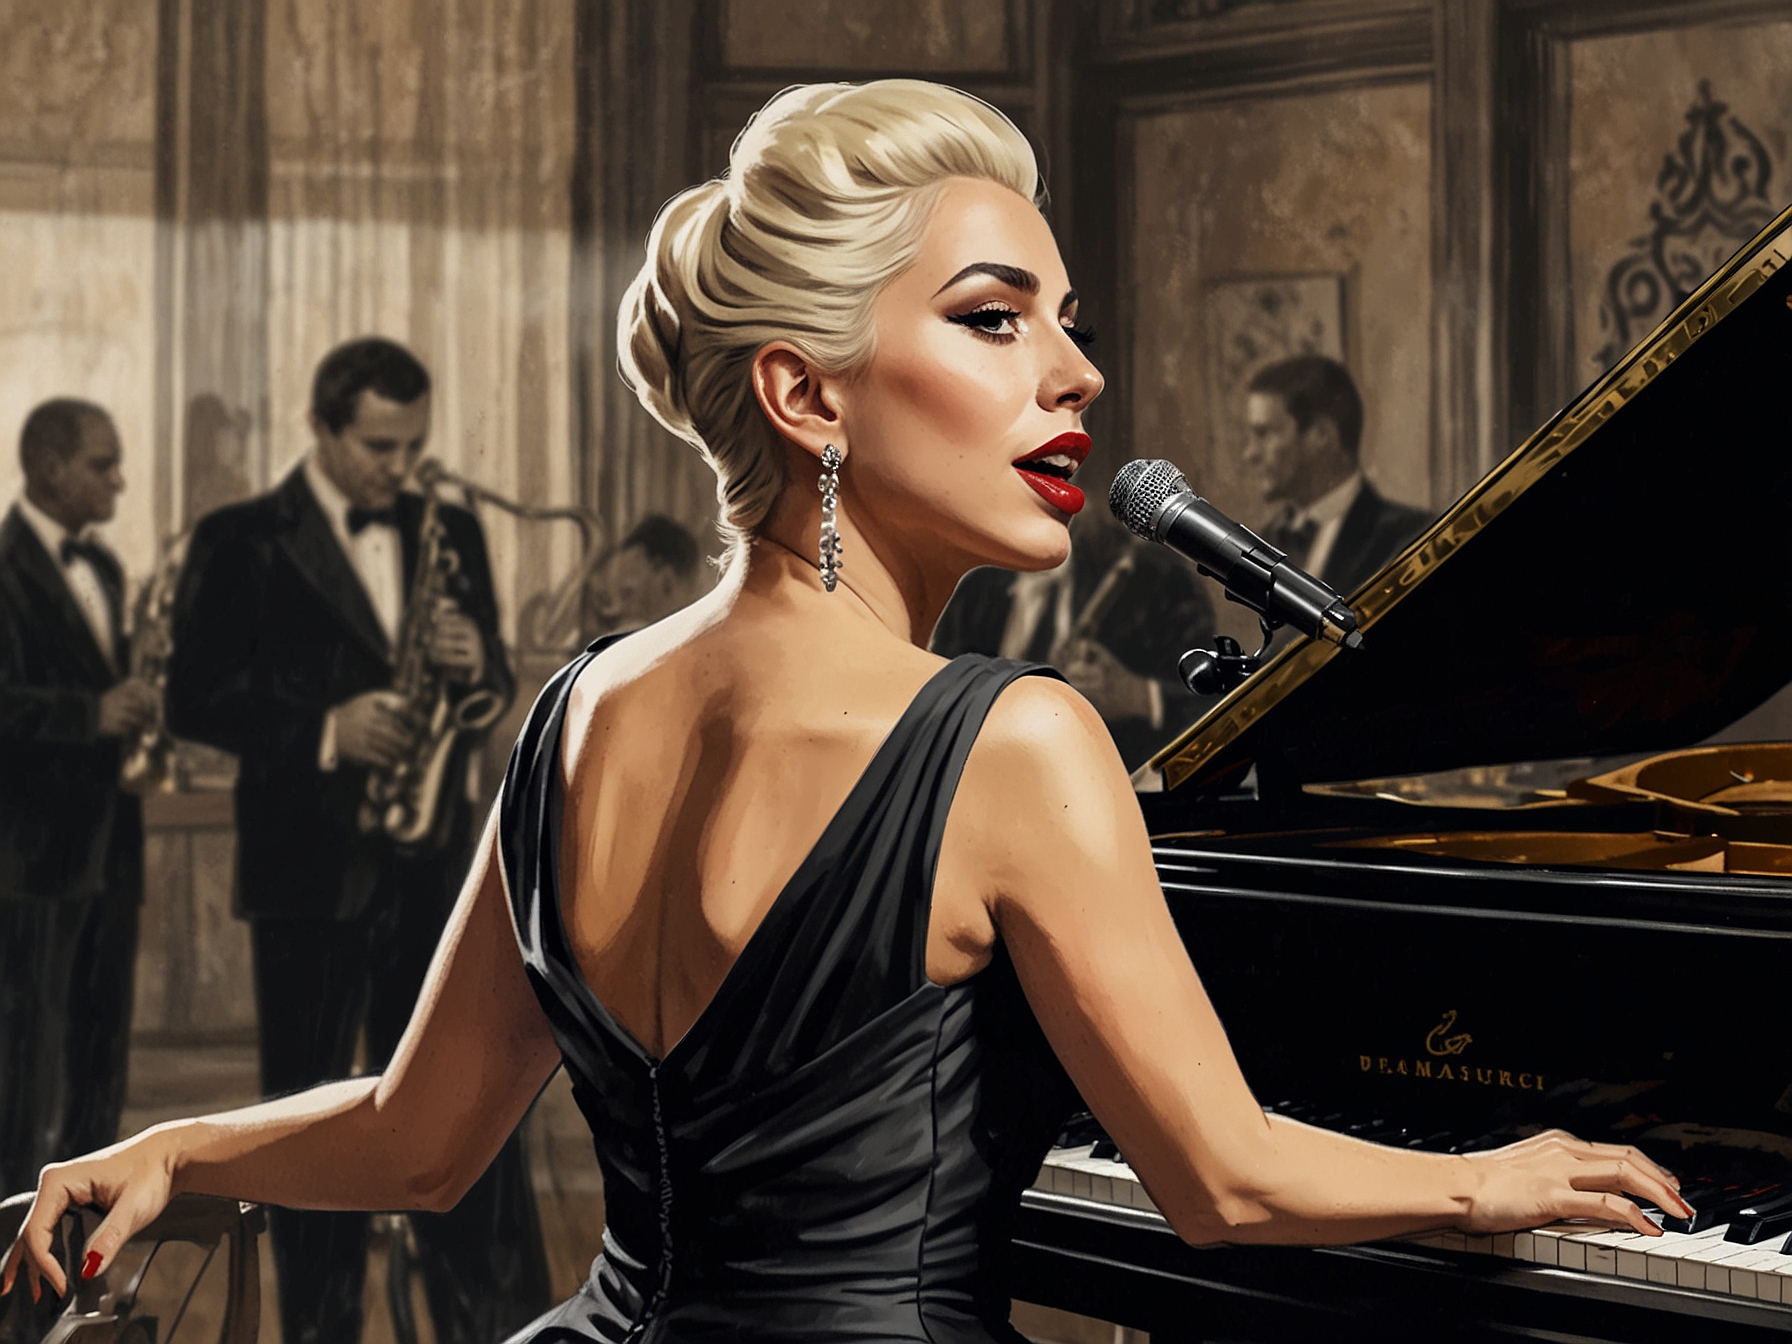 A close-up of Lady Gaga, elegantly dressed in a vintage-inspired gown, passionately performing a jazz standard. The intimate setting adds to the nostalgic ambiance of the 'Jazz + Piano' residency.